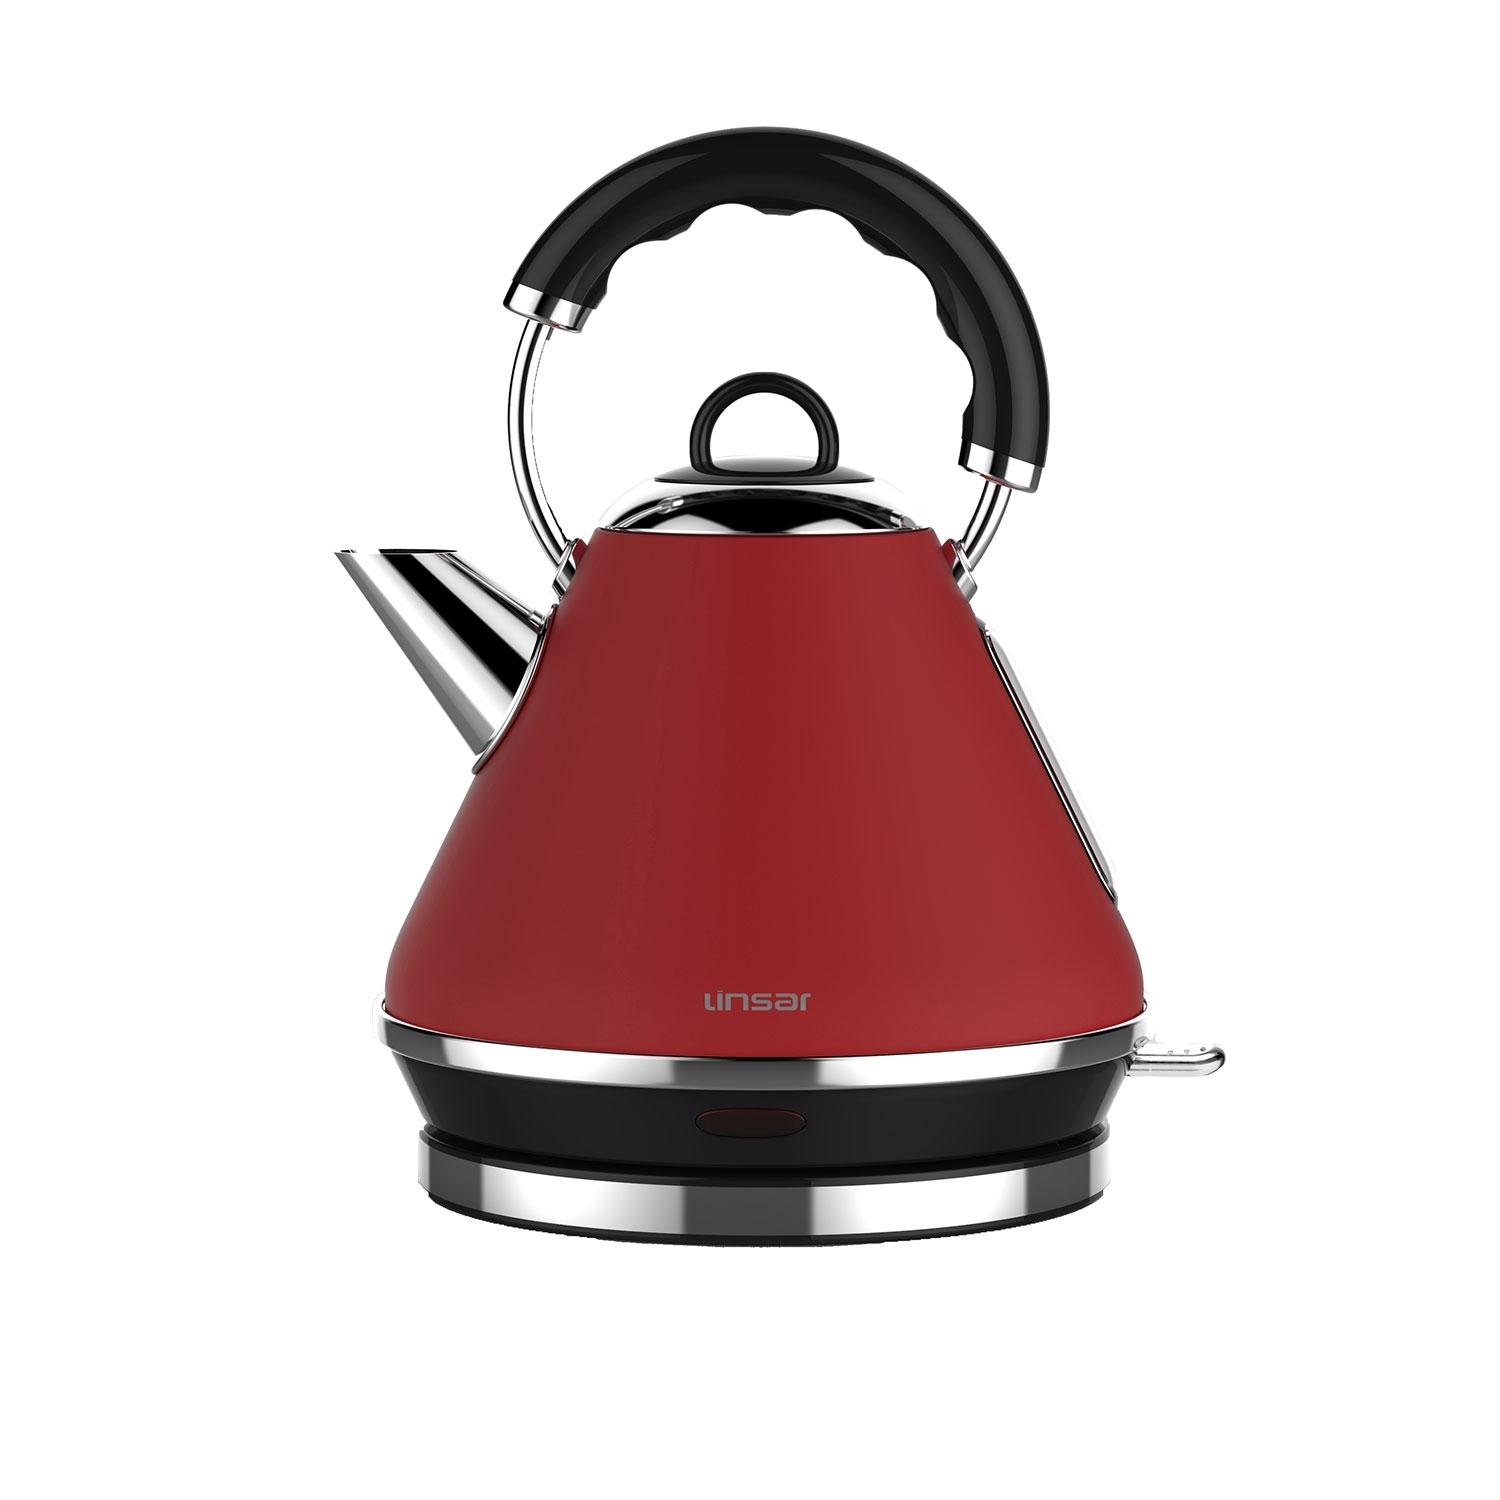 Linsar 1.7 Litre Pyramid Kettle - Red - 1